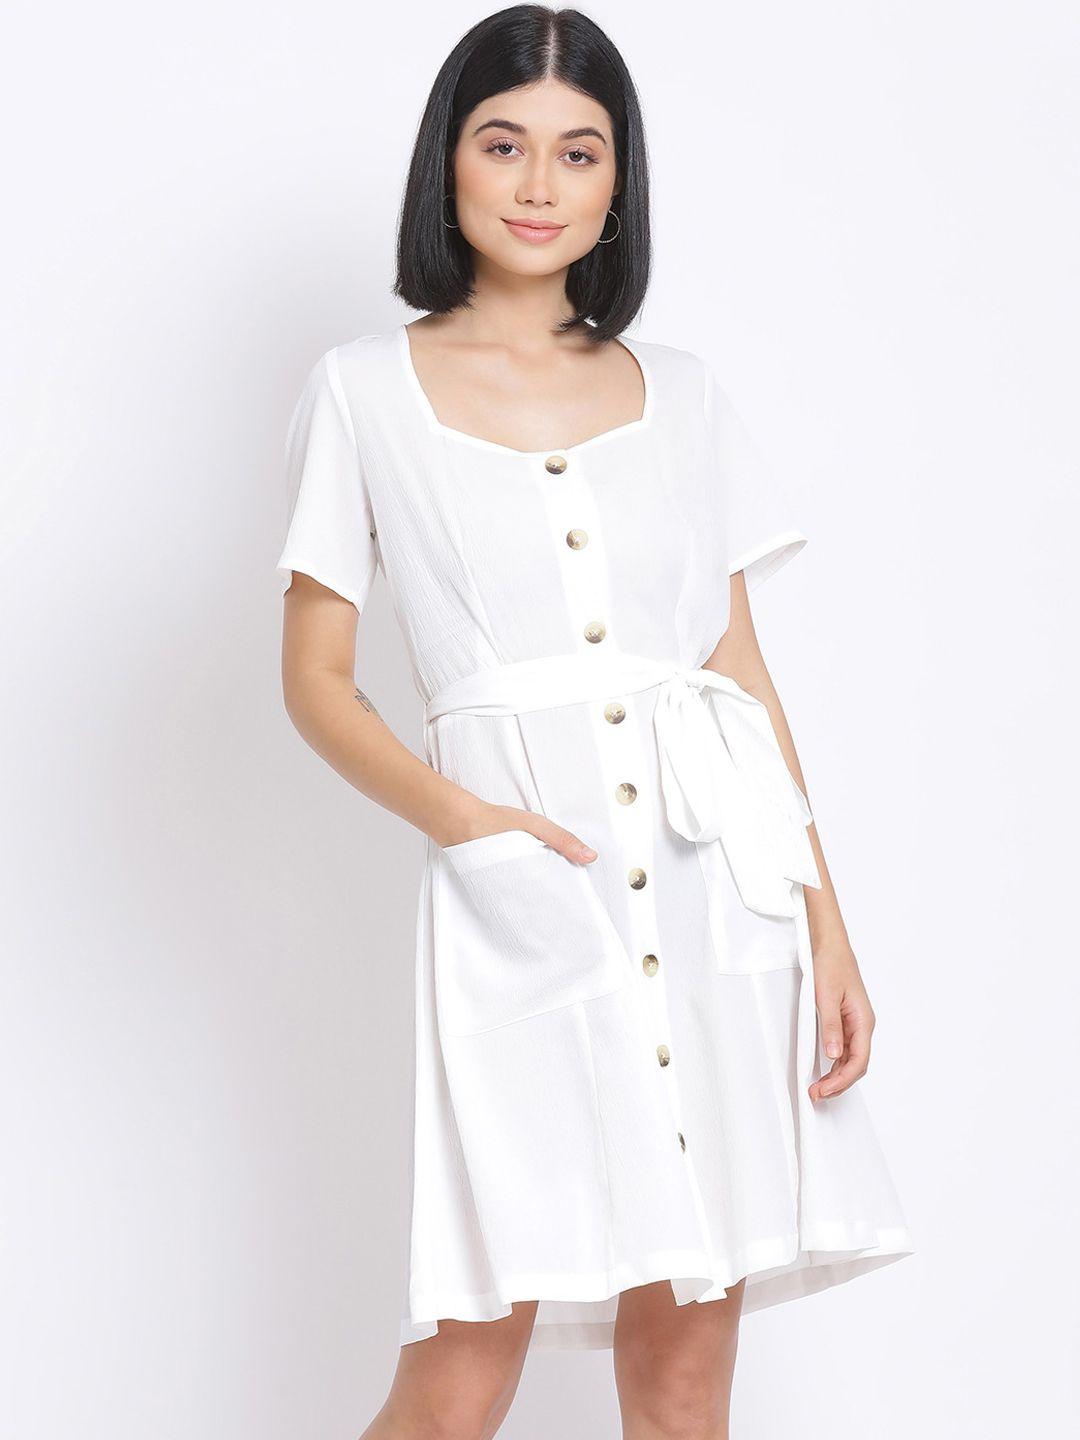 oxolloxo-women-white-solid-fit-and-flare-dress